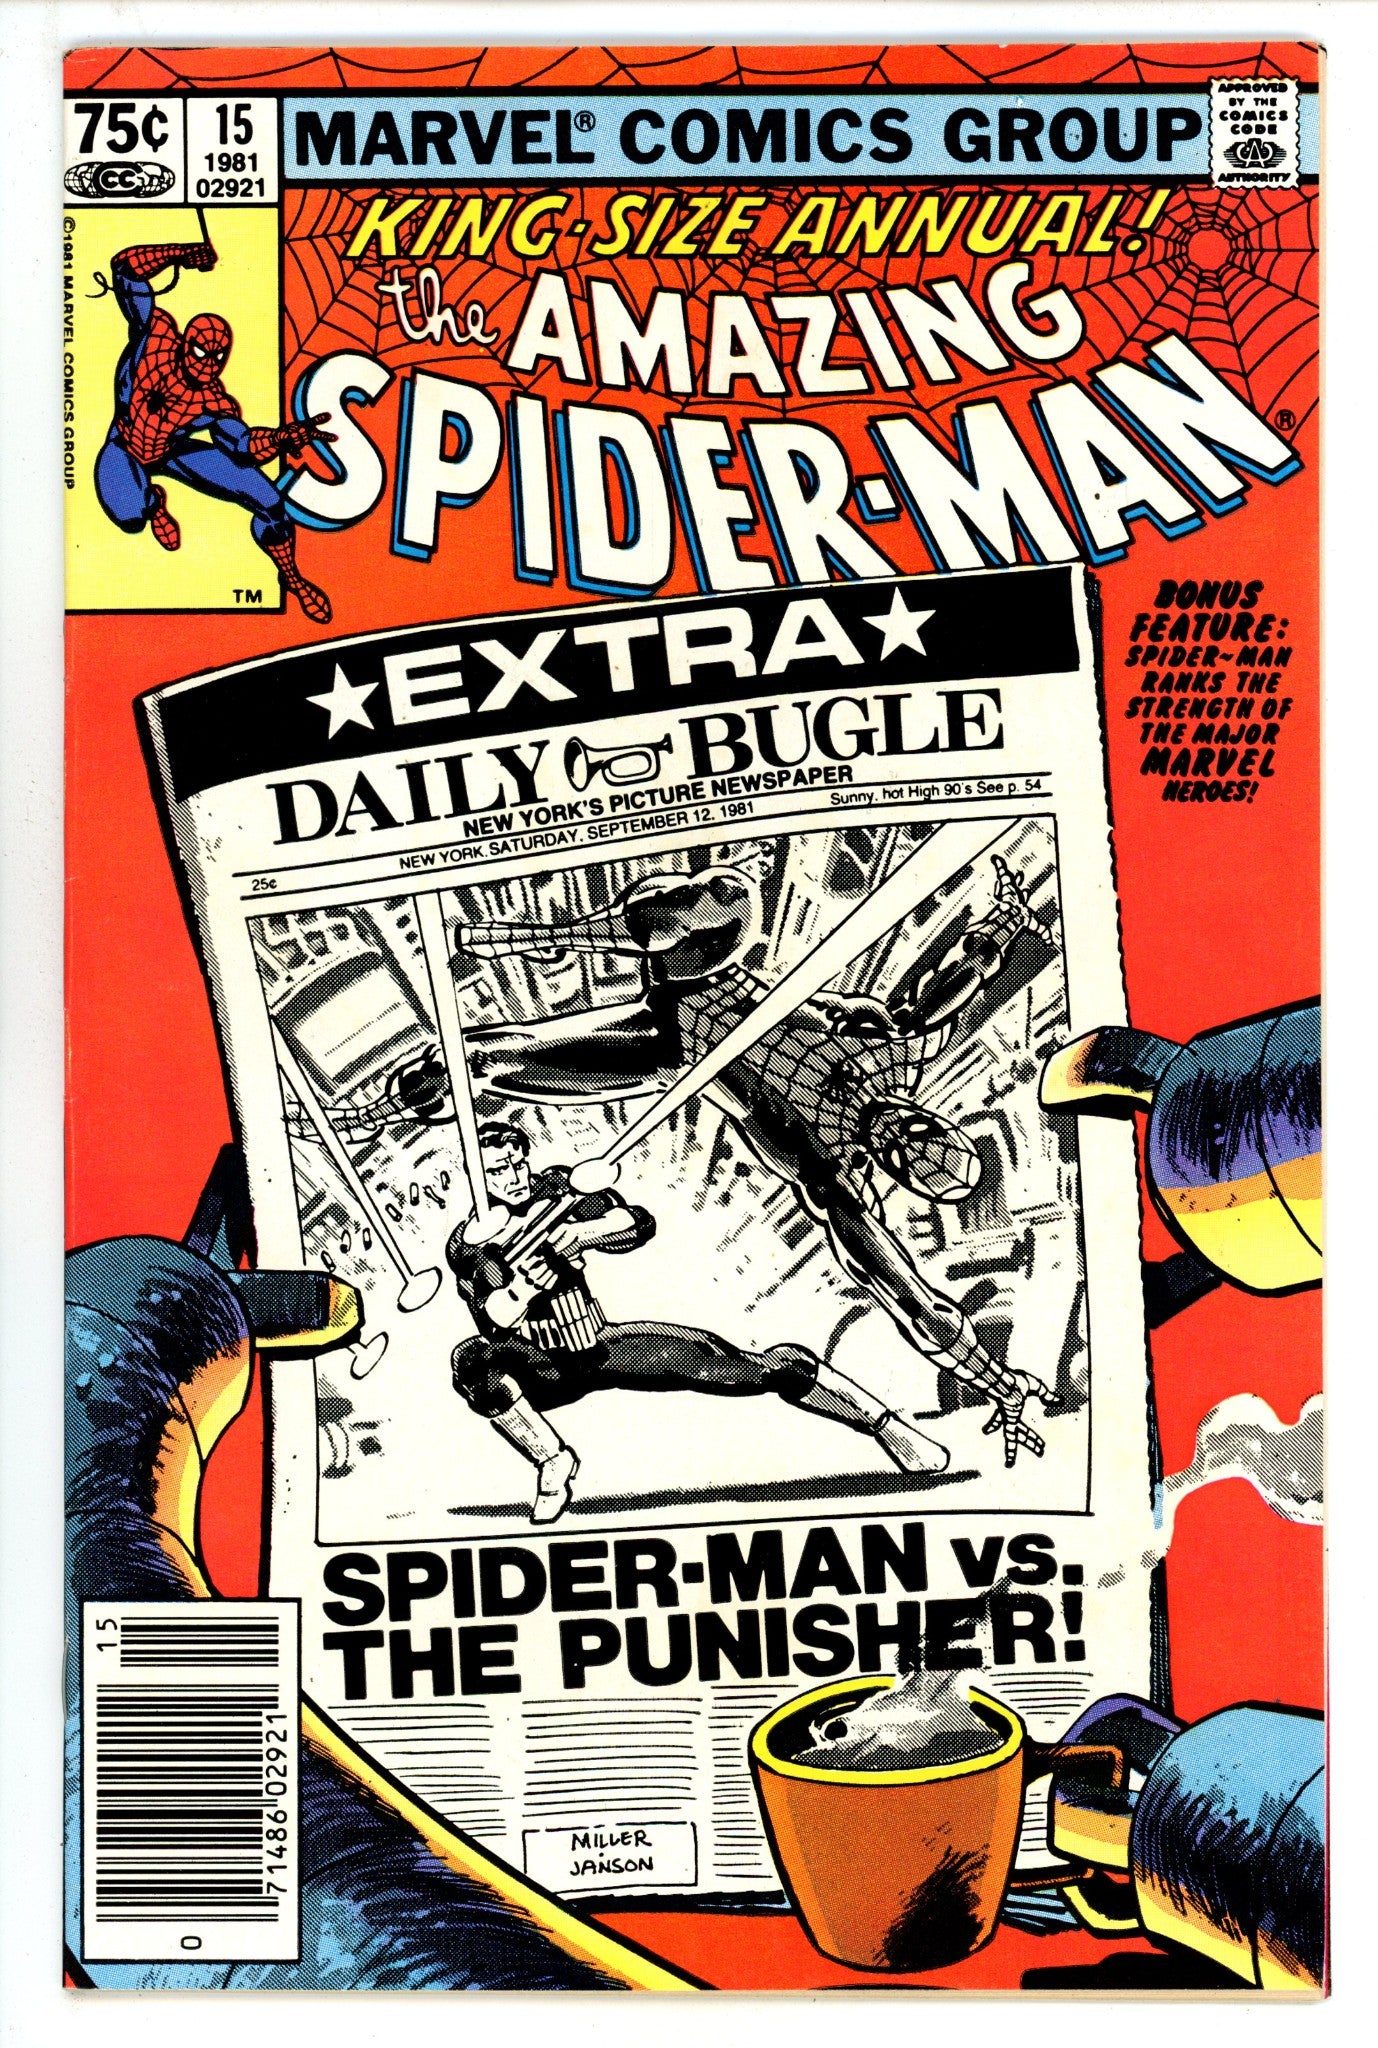 The Amazing Spider-Man Annual Vol 1 15 FN+ (6.5) (1981) Newsstand 